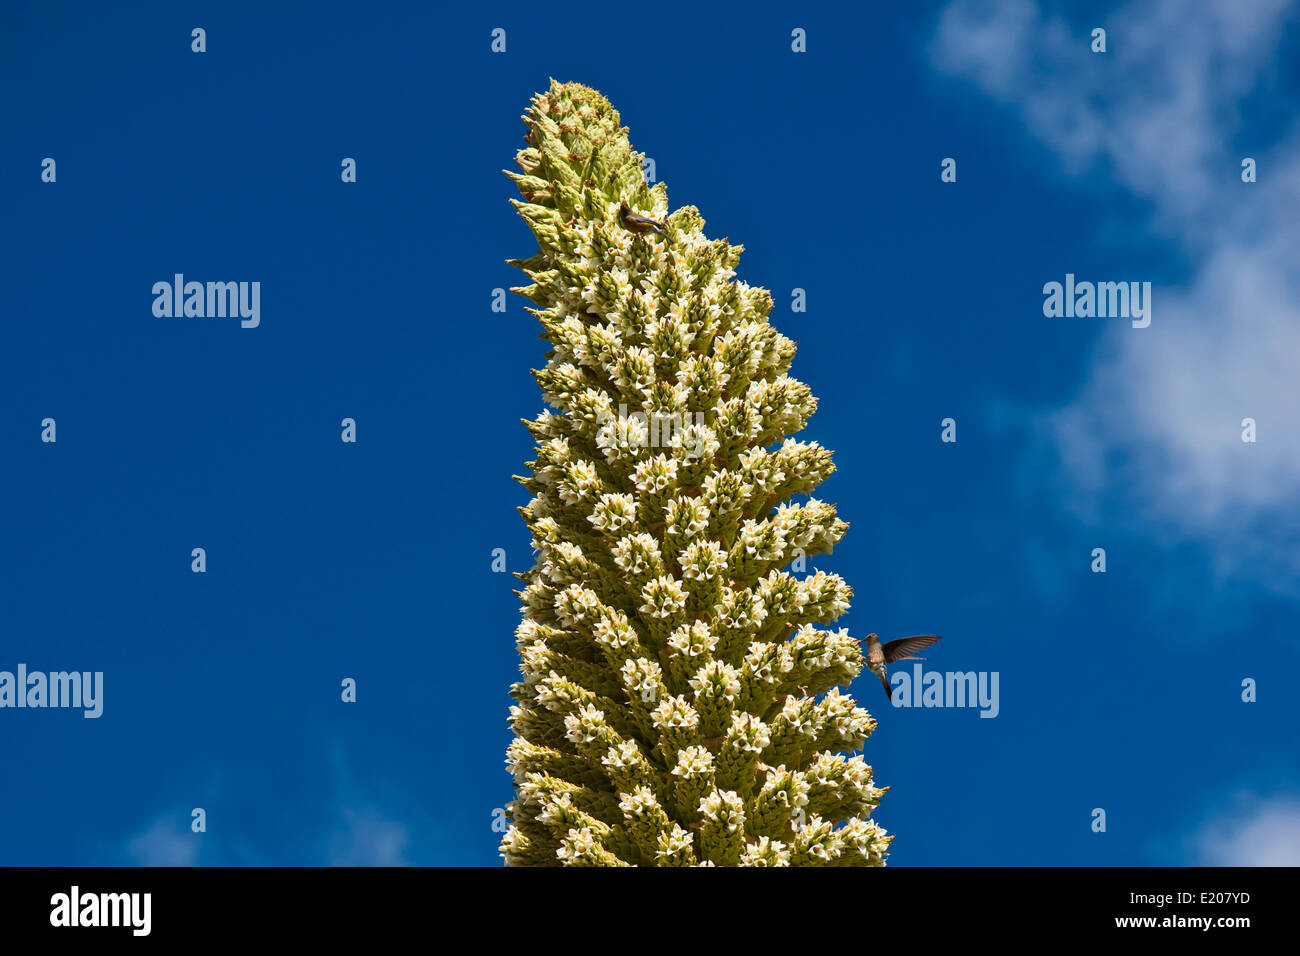 Queen of the Andes (Puya raimondii), inflorescences about 8m high, highest inflorescence in the world, national flower of Peru Stock Photo